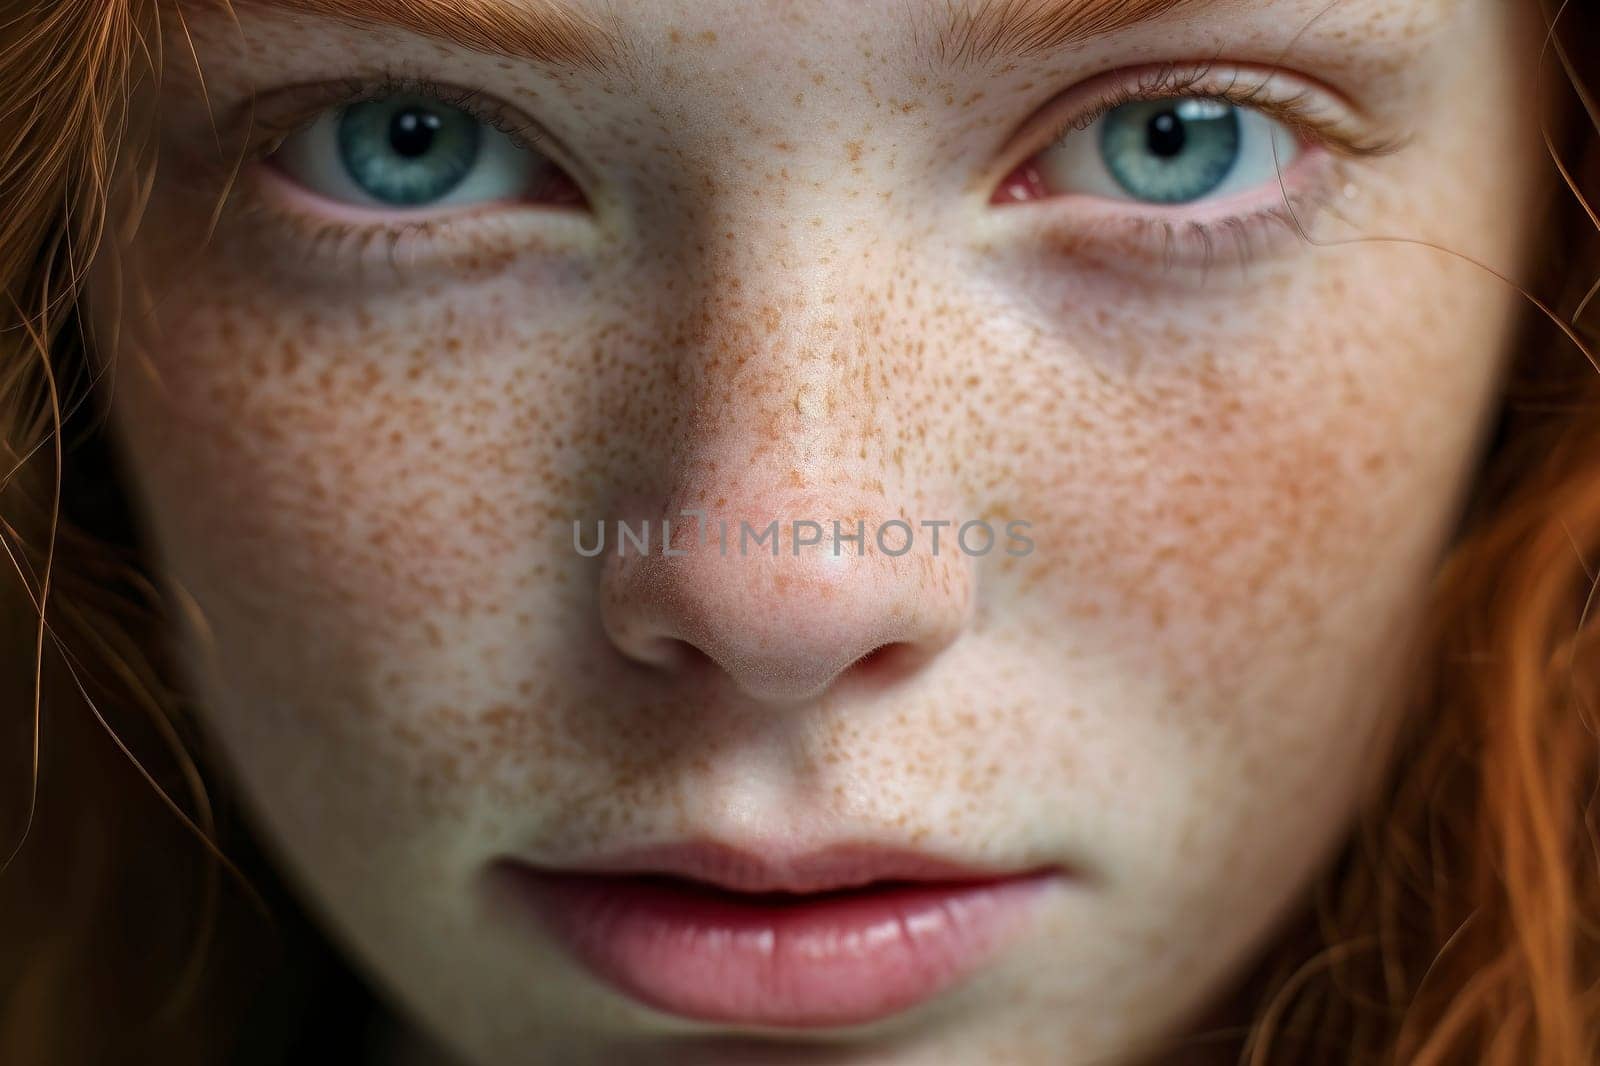 Close-Up Portrait of Redheaded Girl with Freckles by pippocarlot